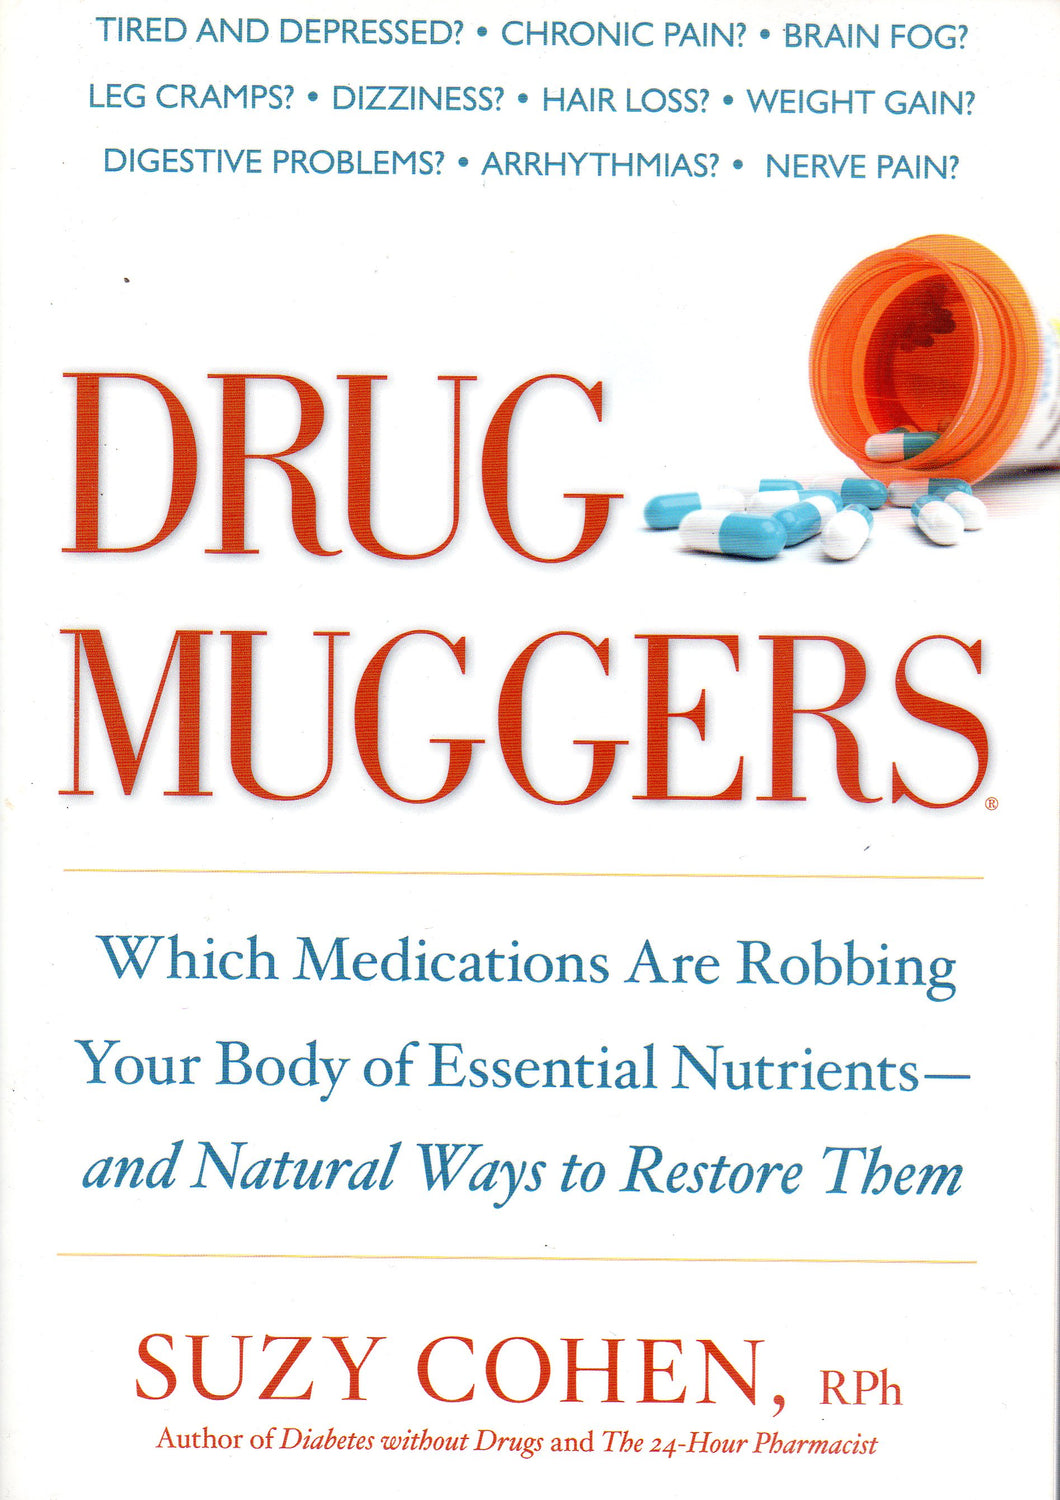 Drug Muggers by Suzy Cohen